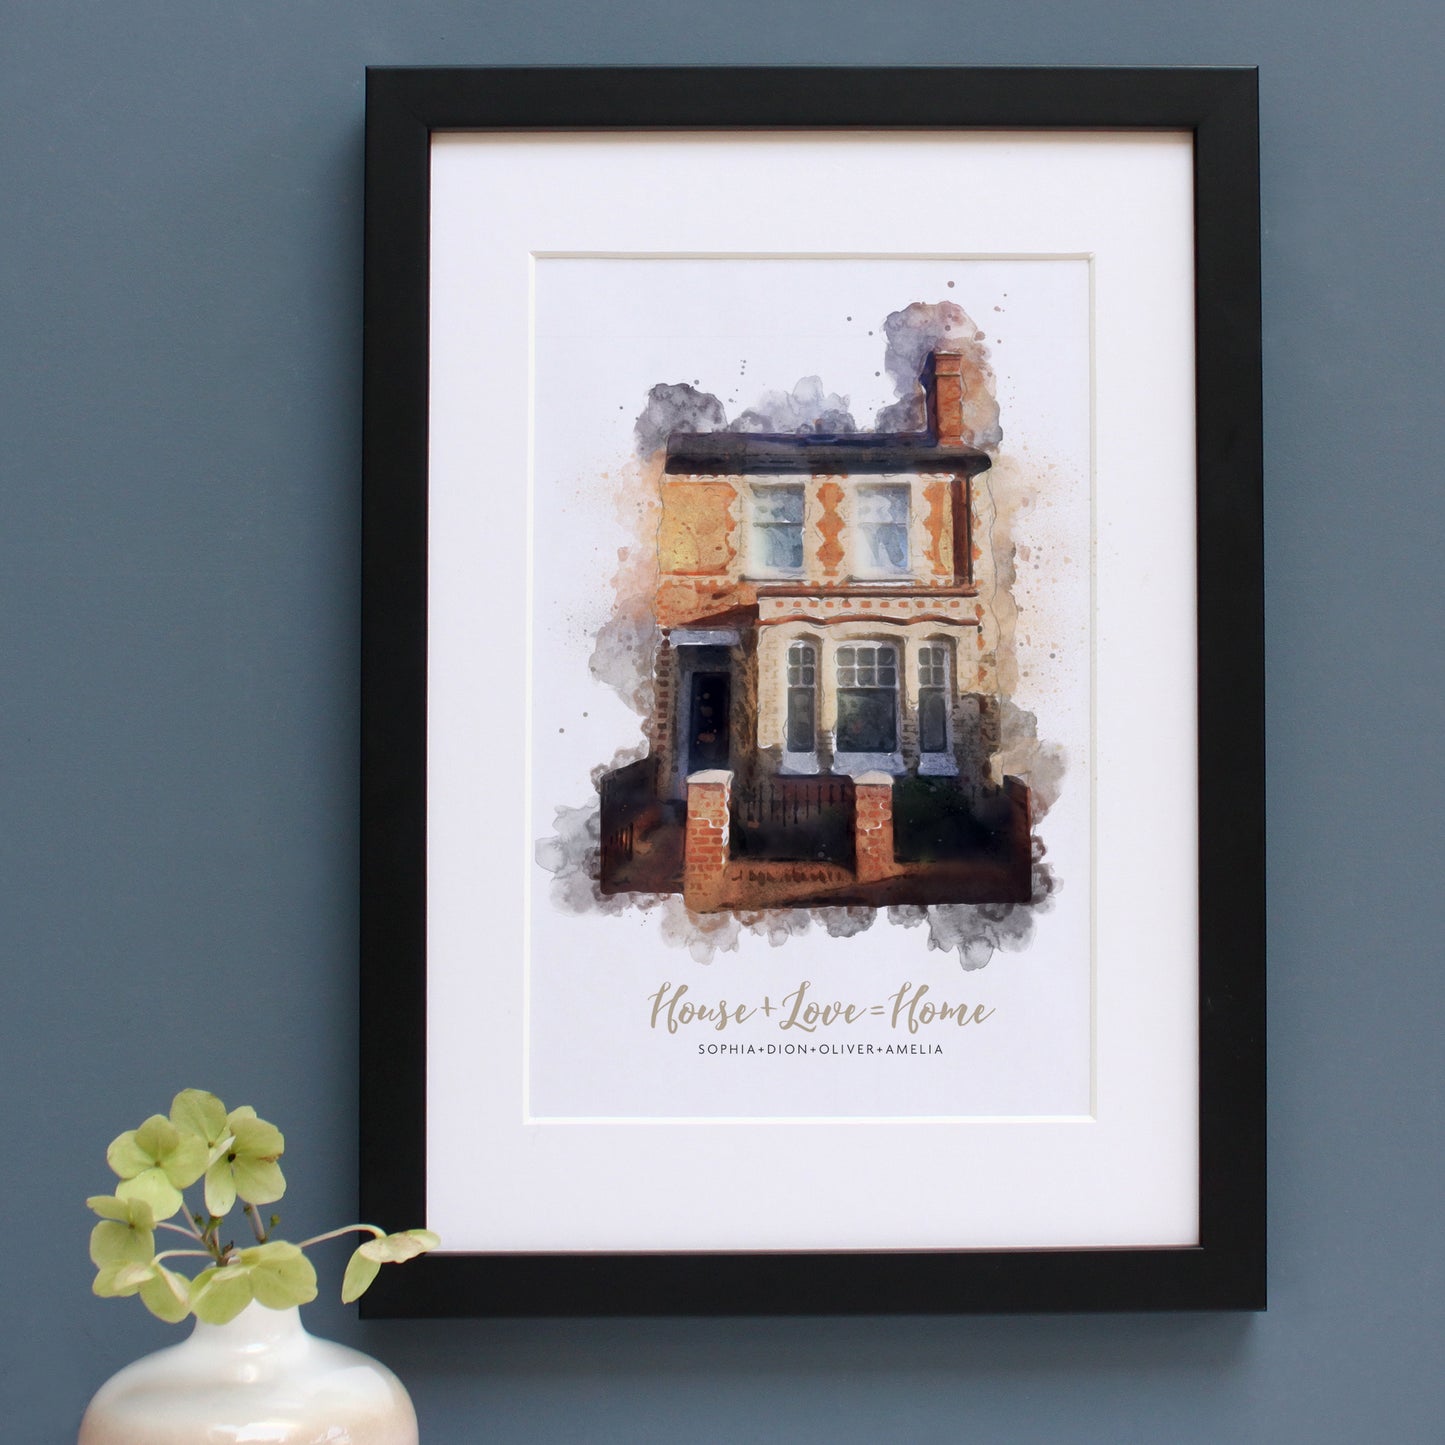 watercolour illustration of a victorian home